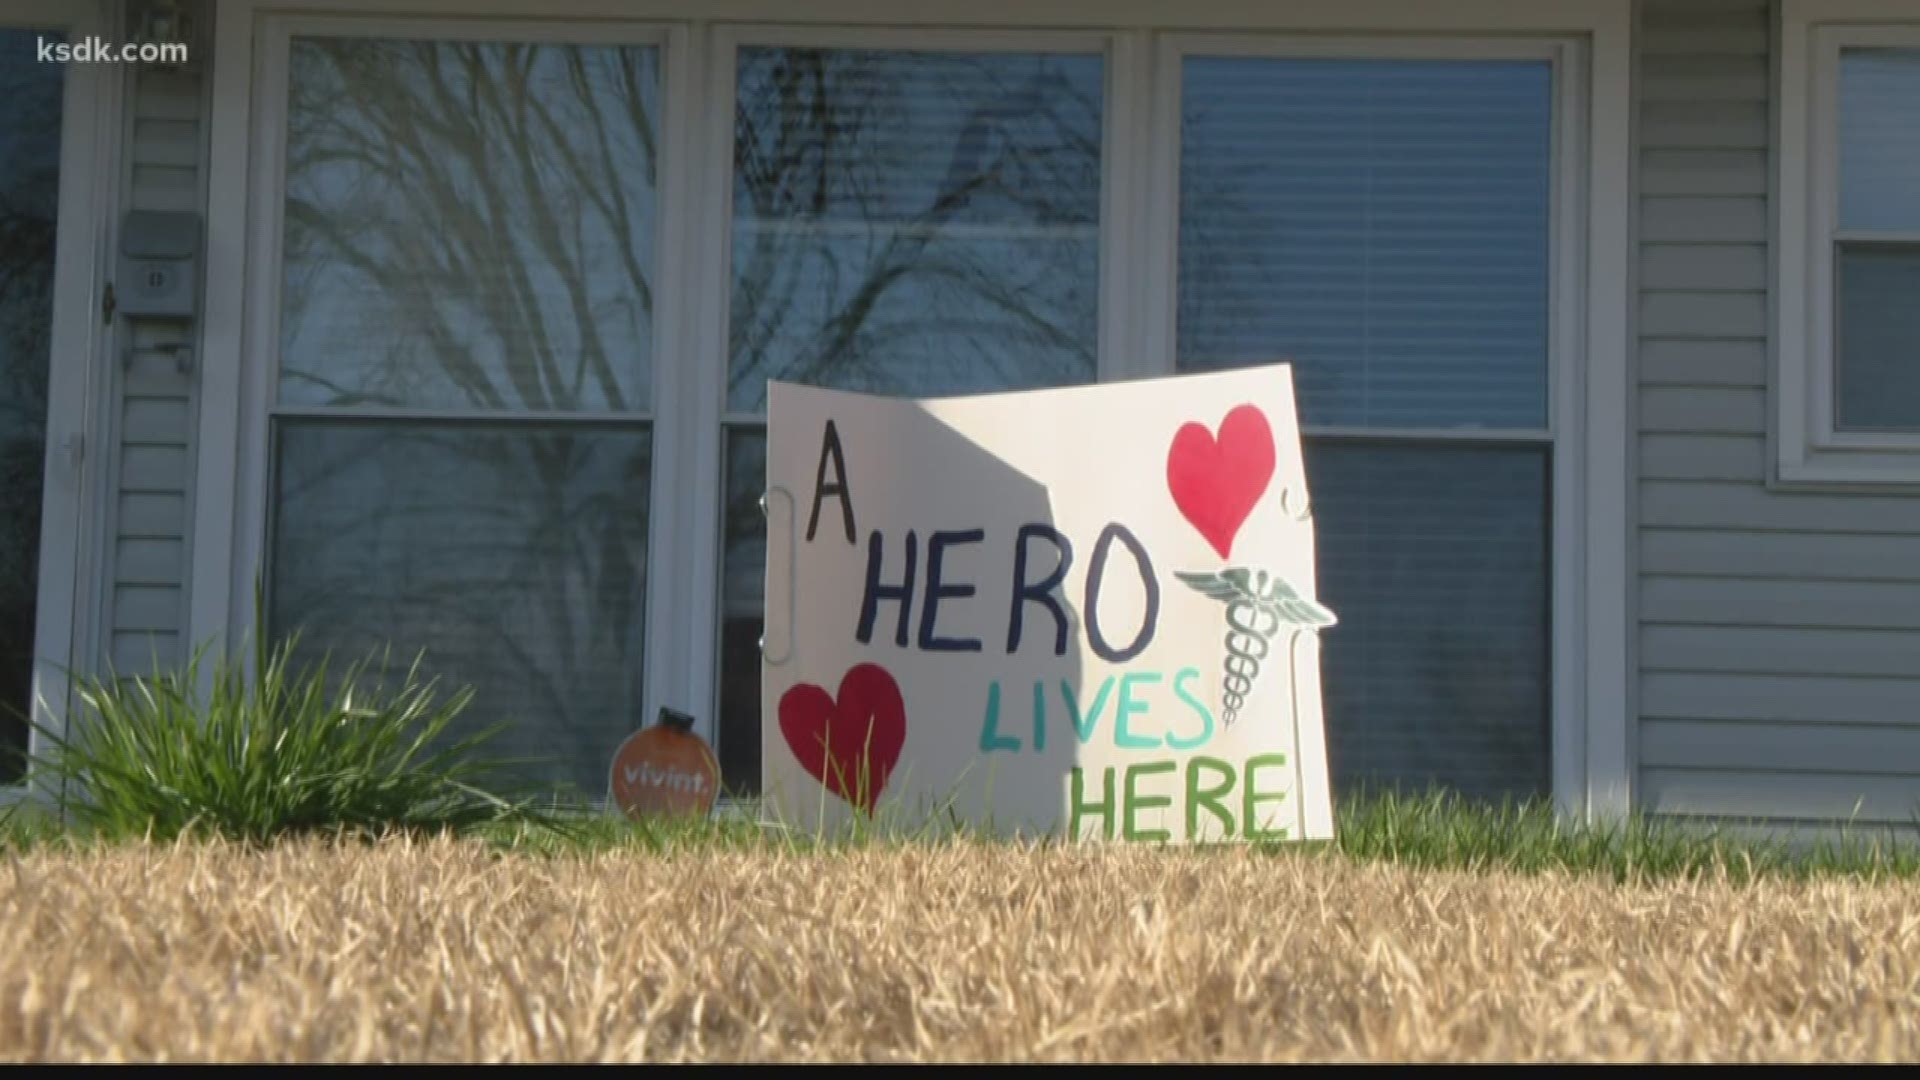 It can be hard to tell what your neighbors do for a living, but one hospital worker is making sure people know where the heroes live